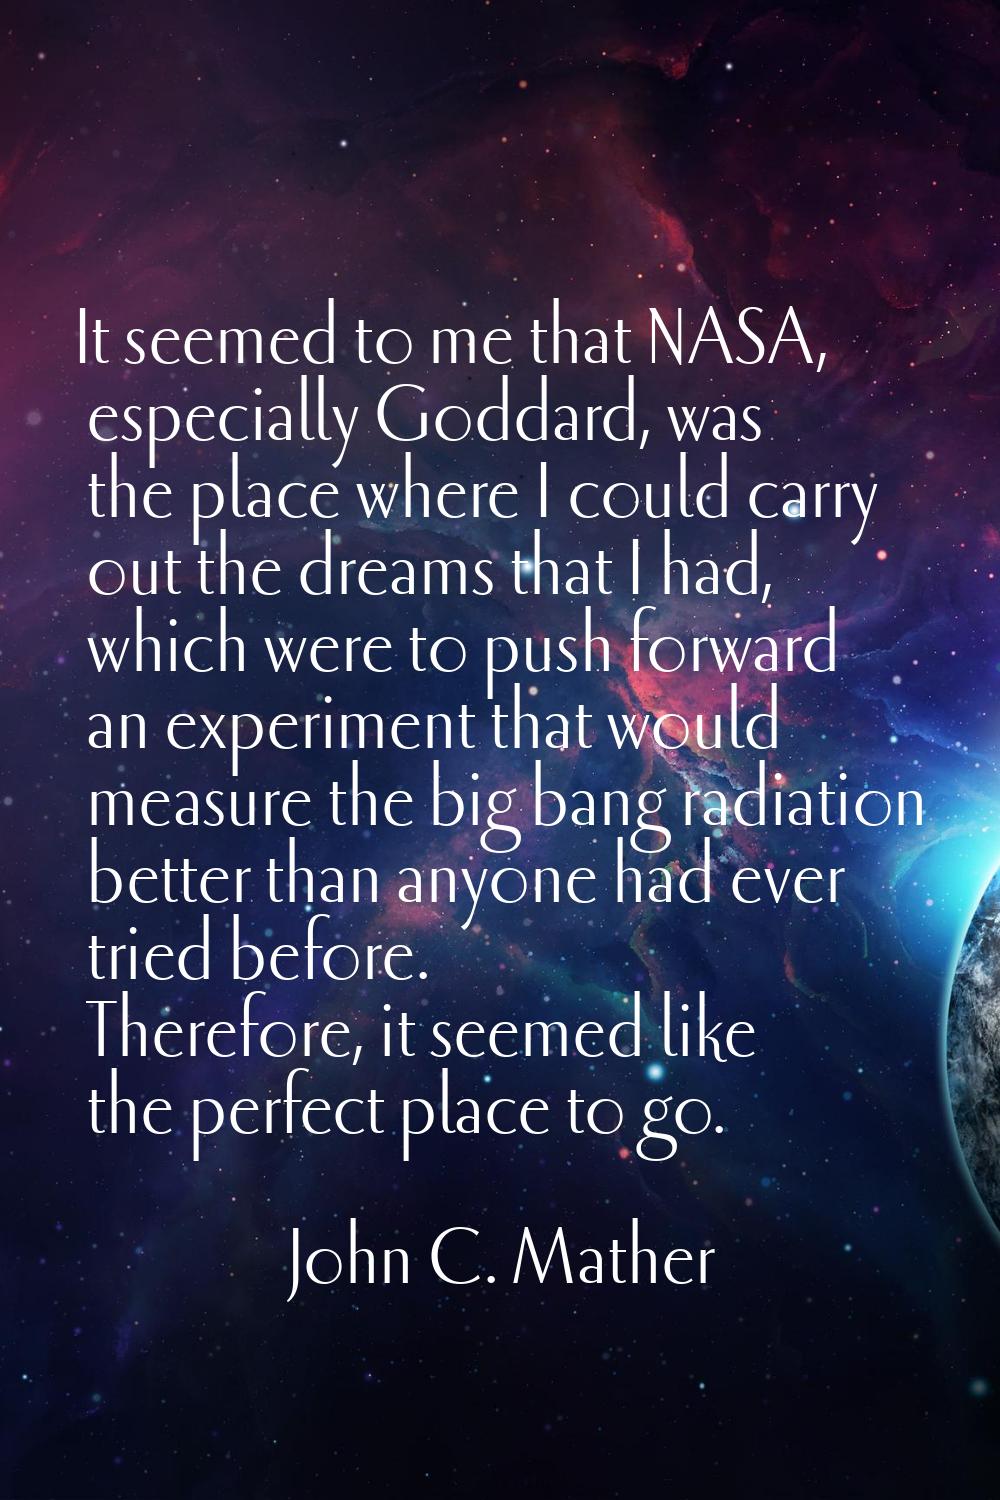 It seemed to me that NASA, especially Goddard, was the place where I could carry out the dreams tha